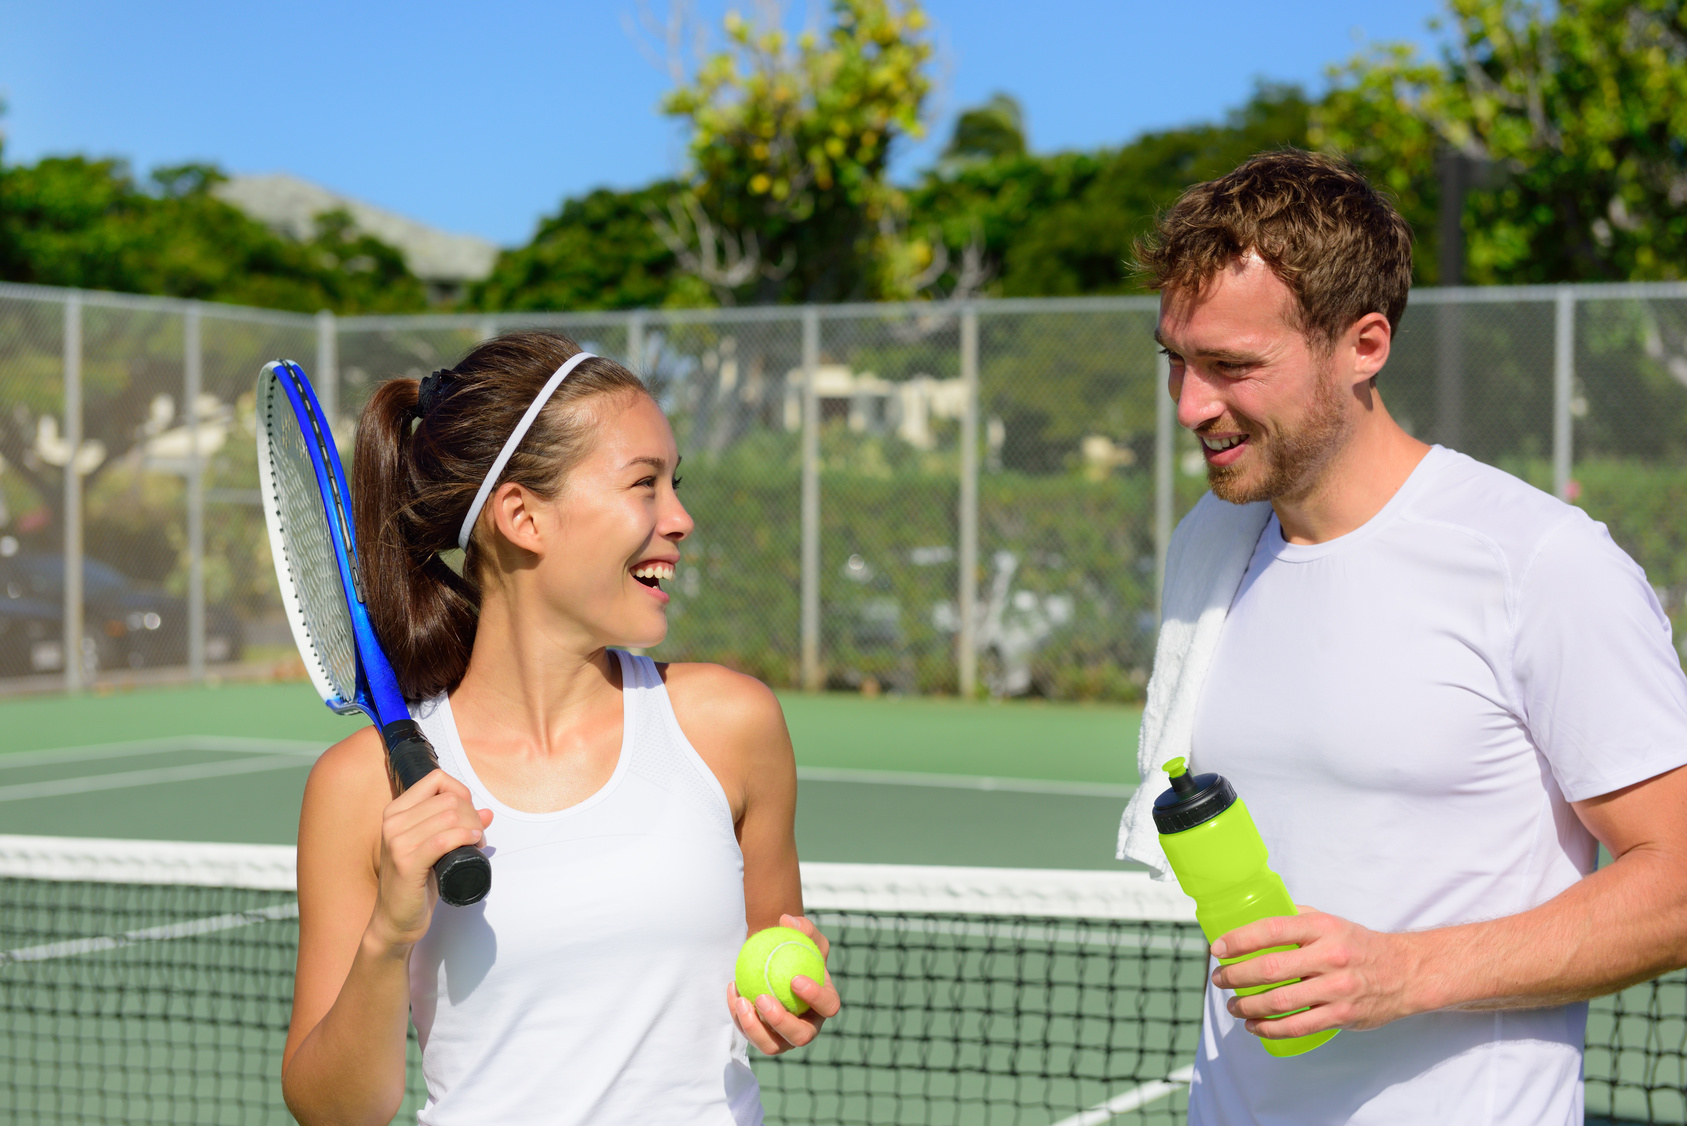 A man and woman laugh together after their adult group tennis lesson.